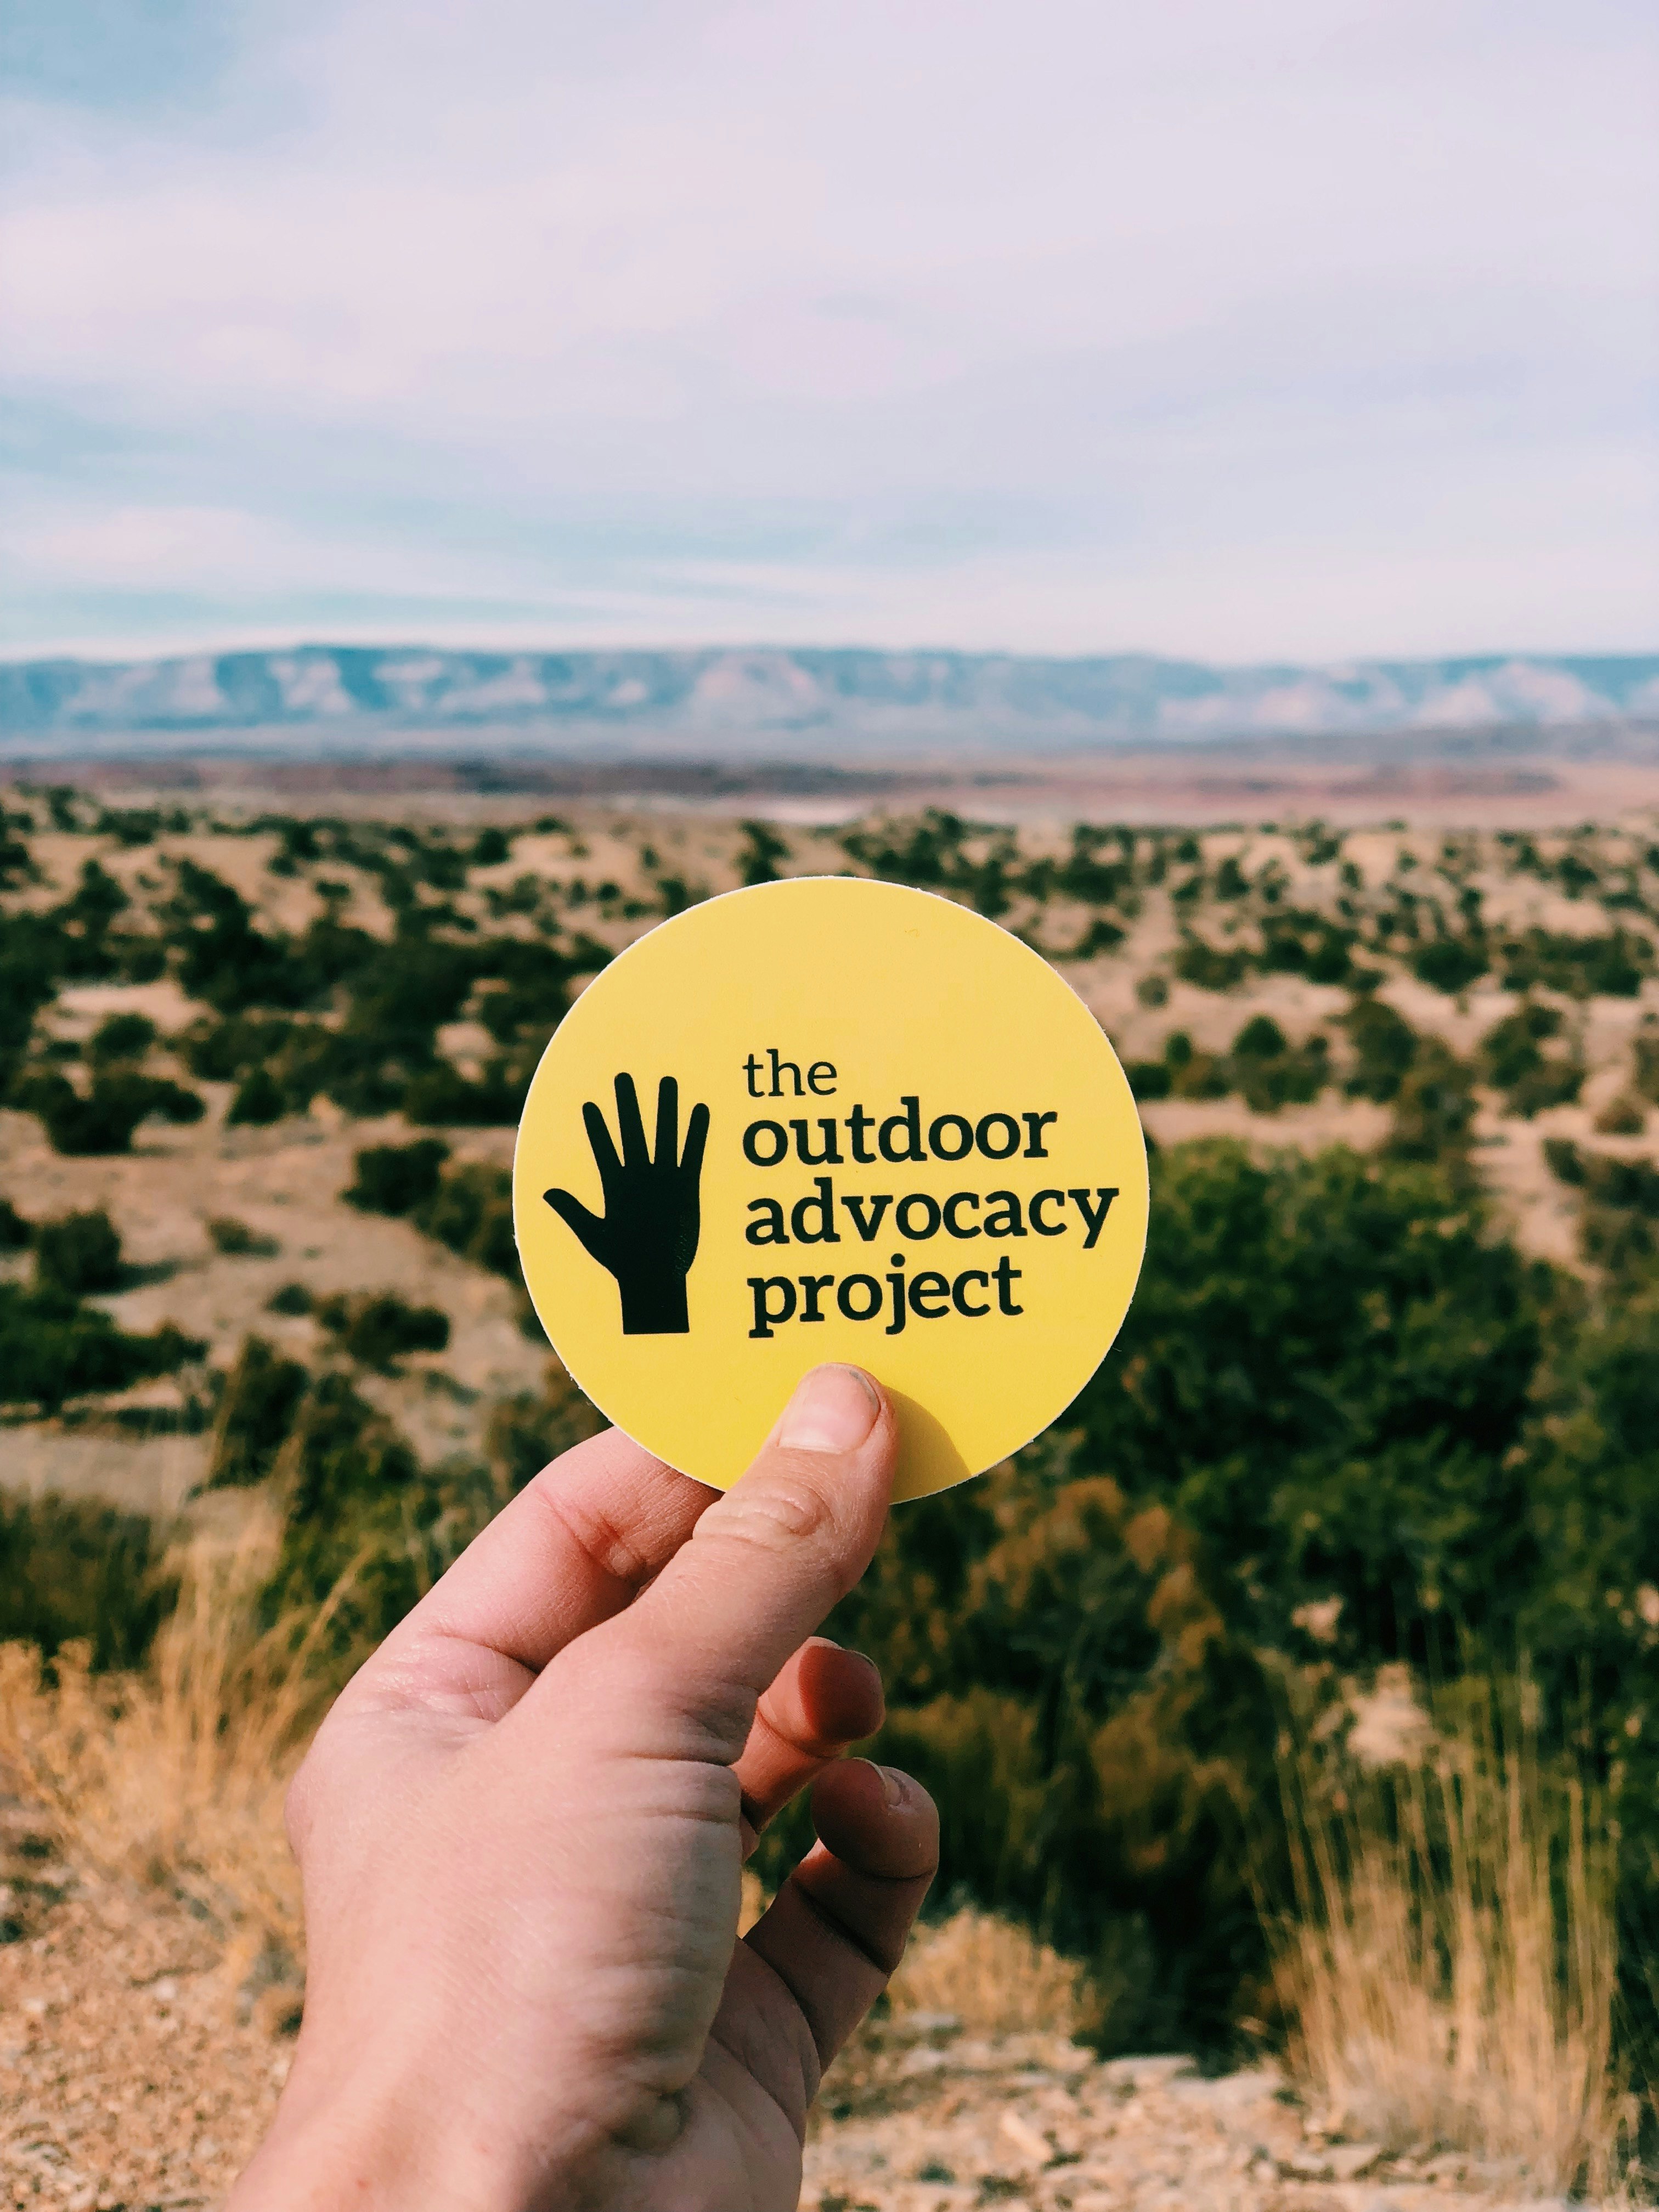 A white hand holds up a yellow Outdoor Advocacy sticker with an illustration of a black hand next to the text in front of a outdoor desert landscape